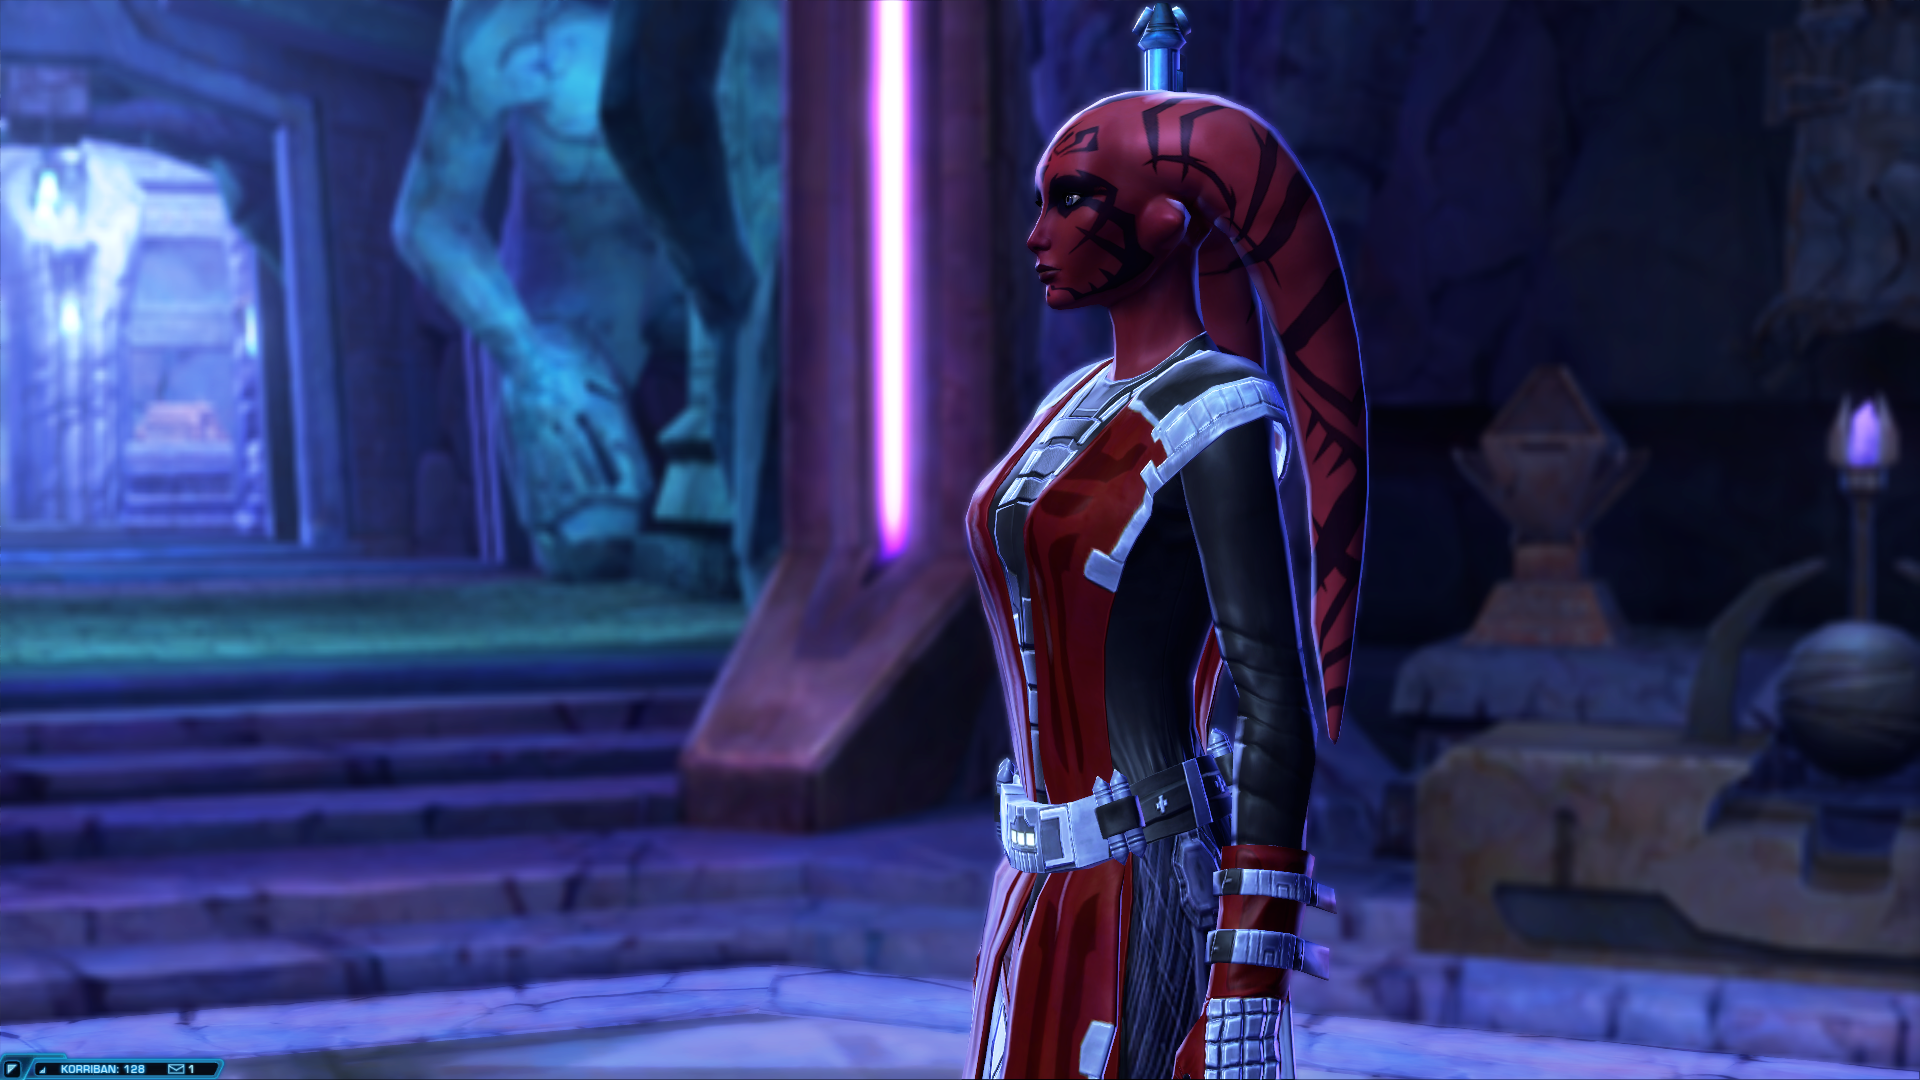 SWTOR   Sith Inquisitor by CenturyNitro on